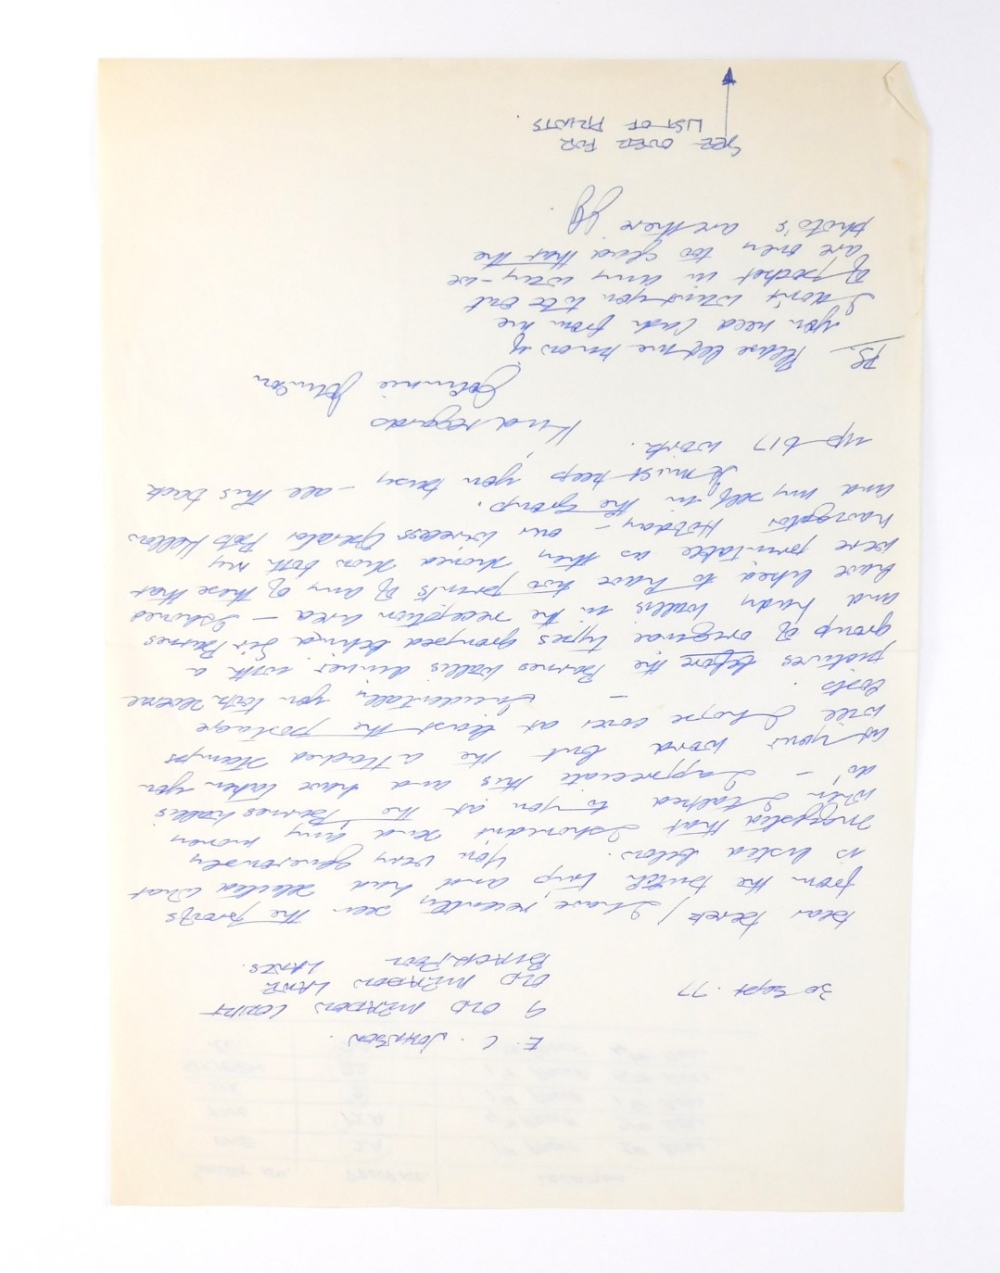 A letter written to the vendor by 617 Squadron Member Johnnie Johnson.